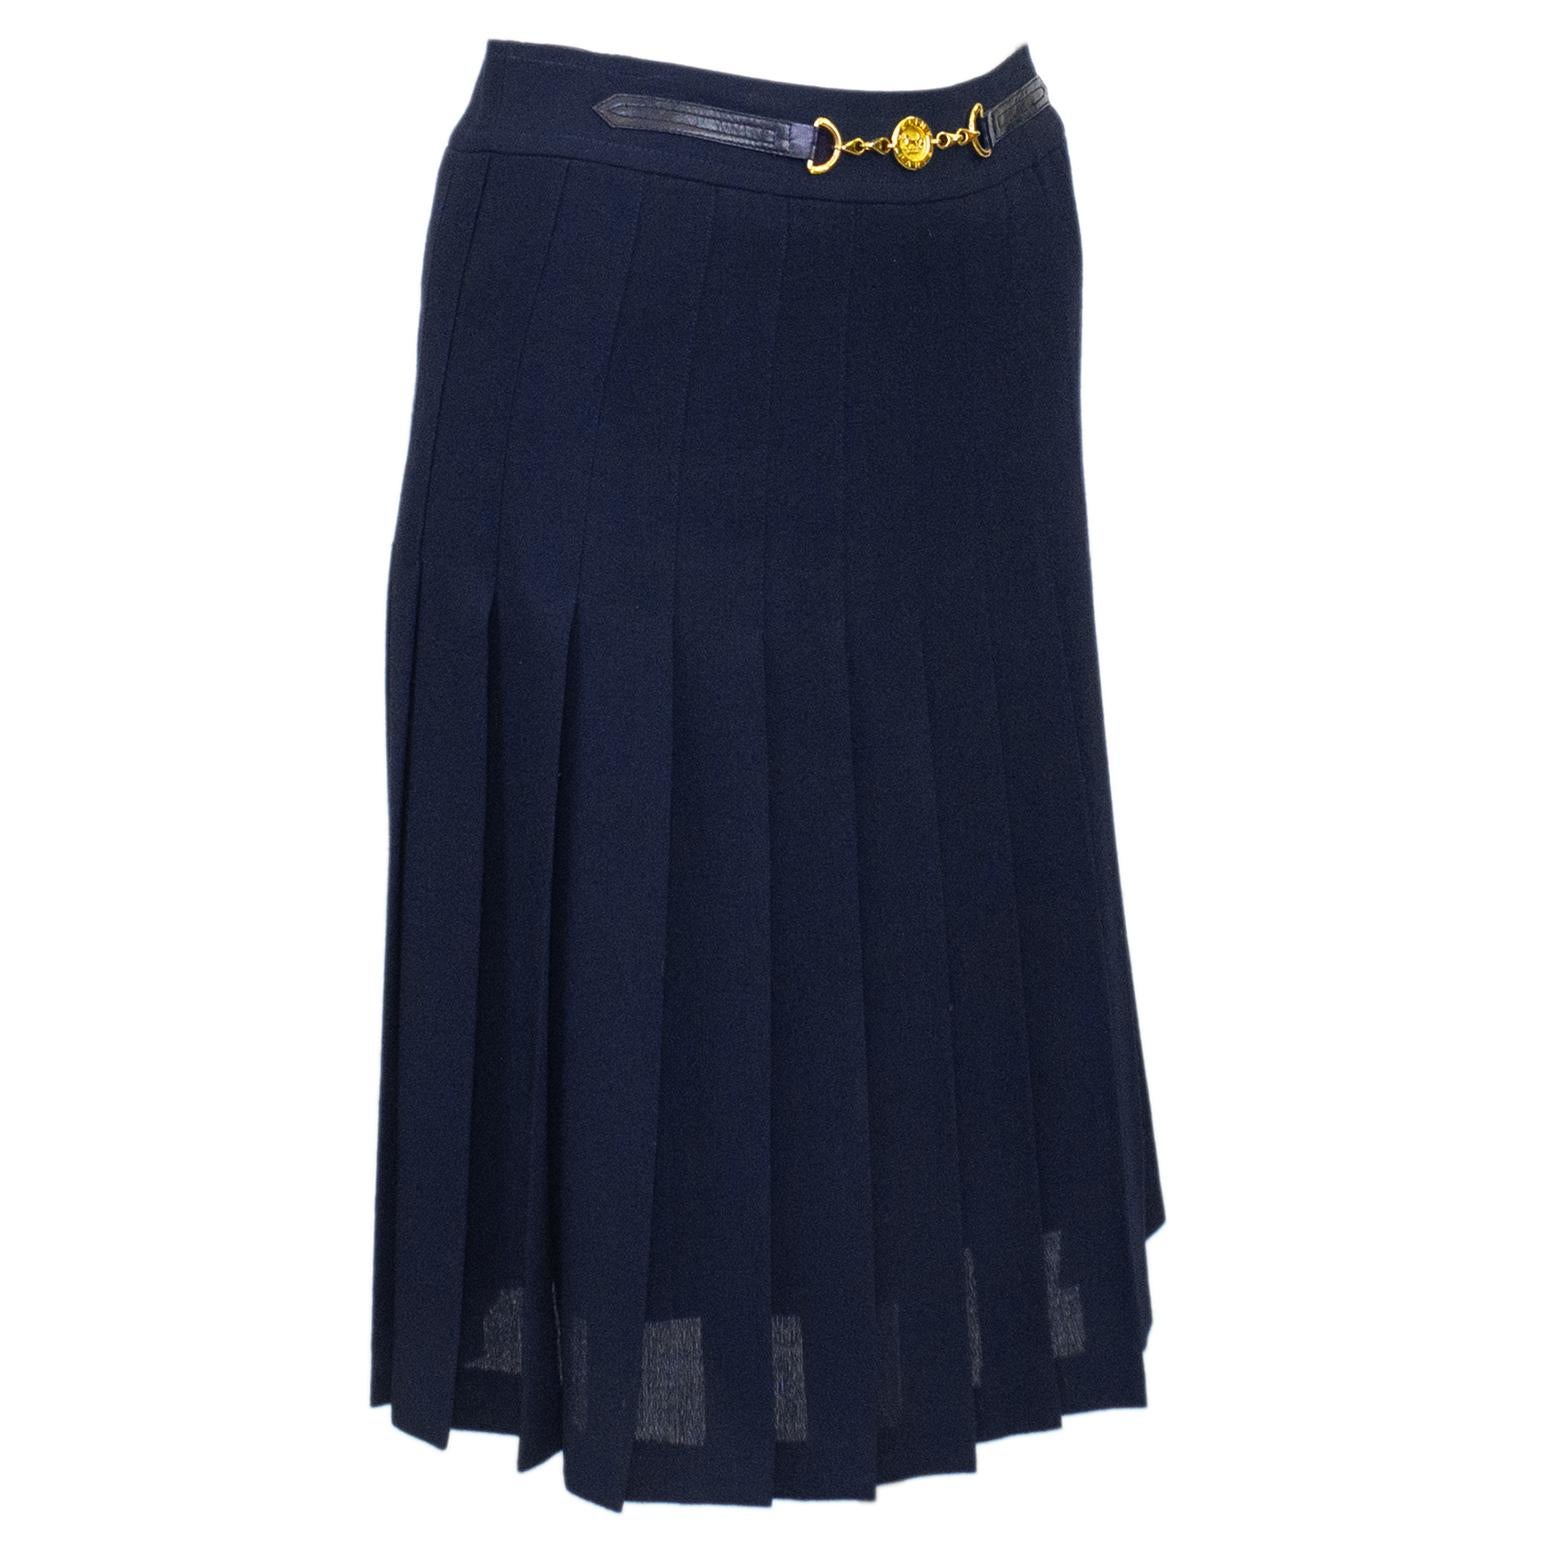 1970's classic Celine navy blue wool gabardine pleated skirt with half navy leather and gold belt at waistband. Vintage Celine horse and buggy logo gold metal coin centre of belt. Overall A line shape. In excellent condition, back zipper with hook